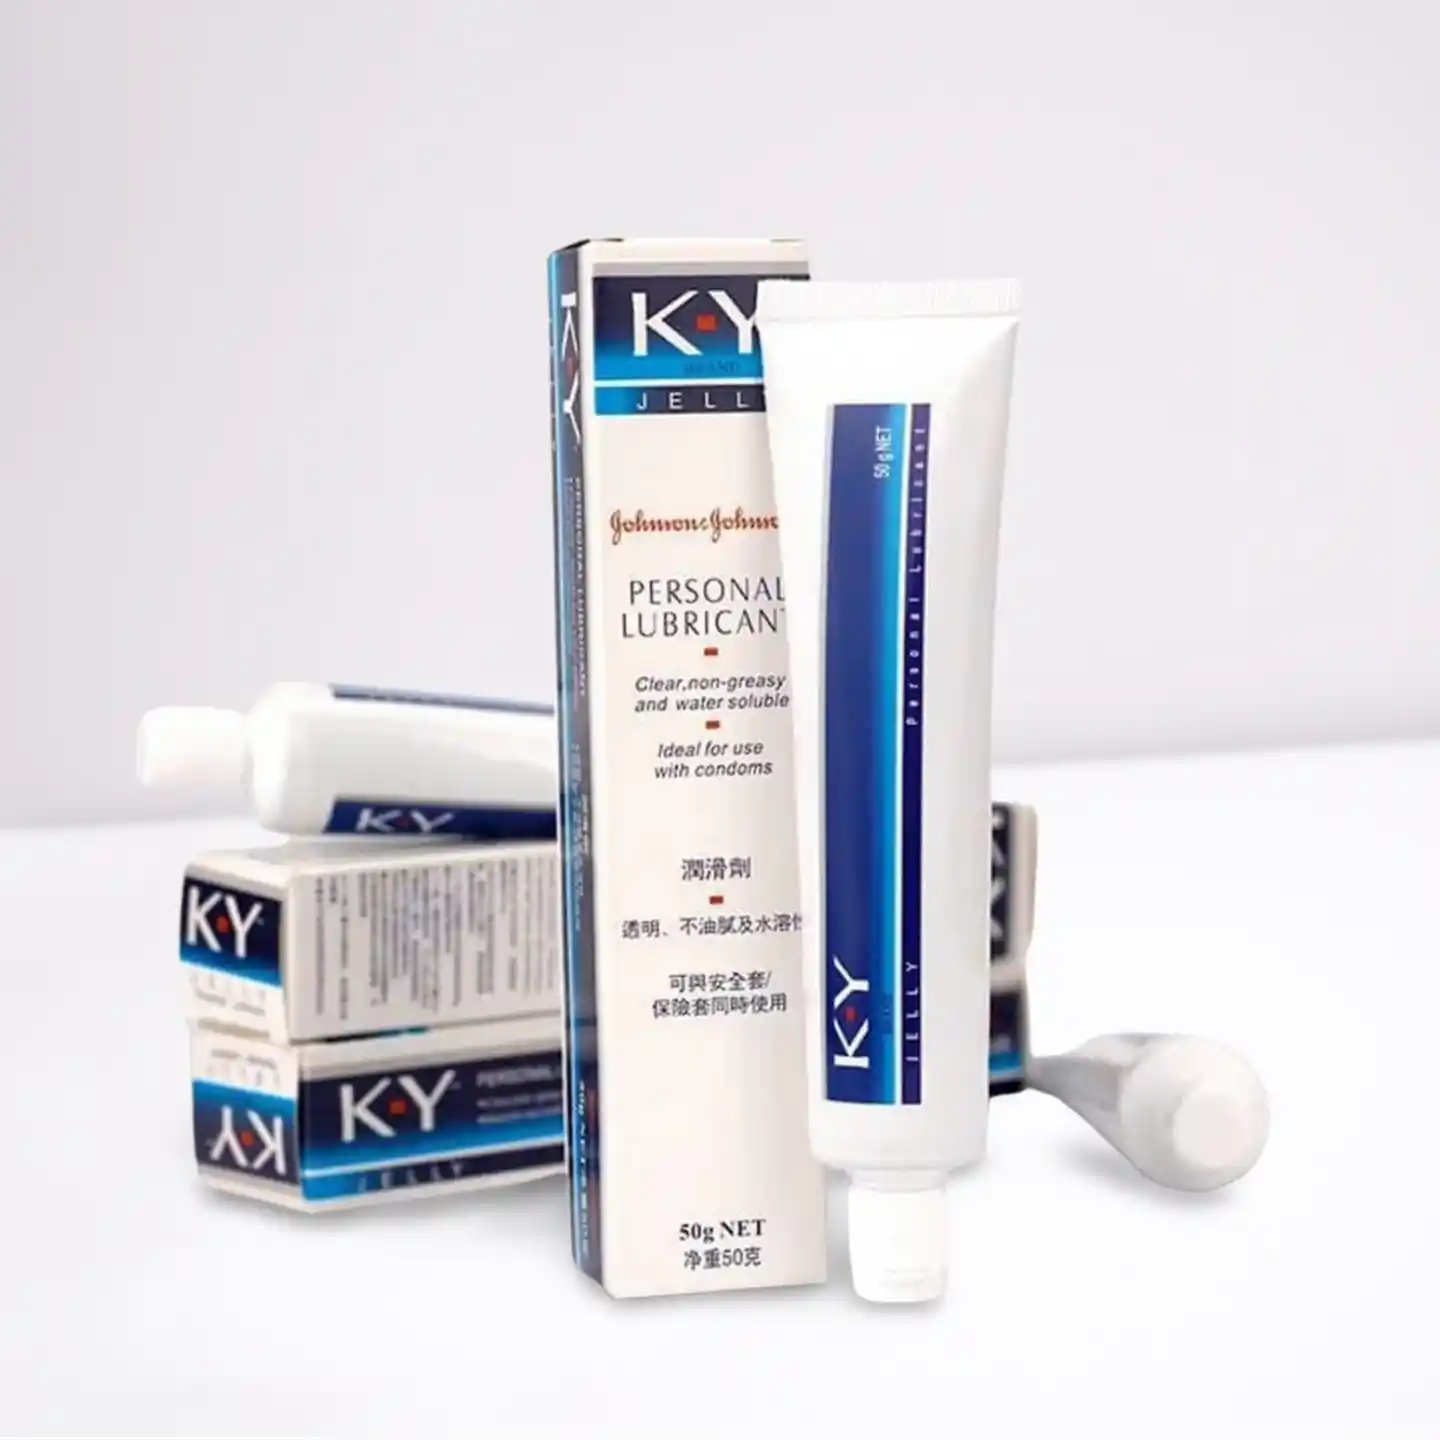 K-y Jelly Personal Lubricant Johnsons And Johnsons